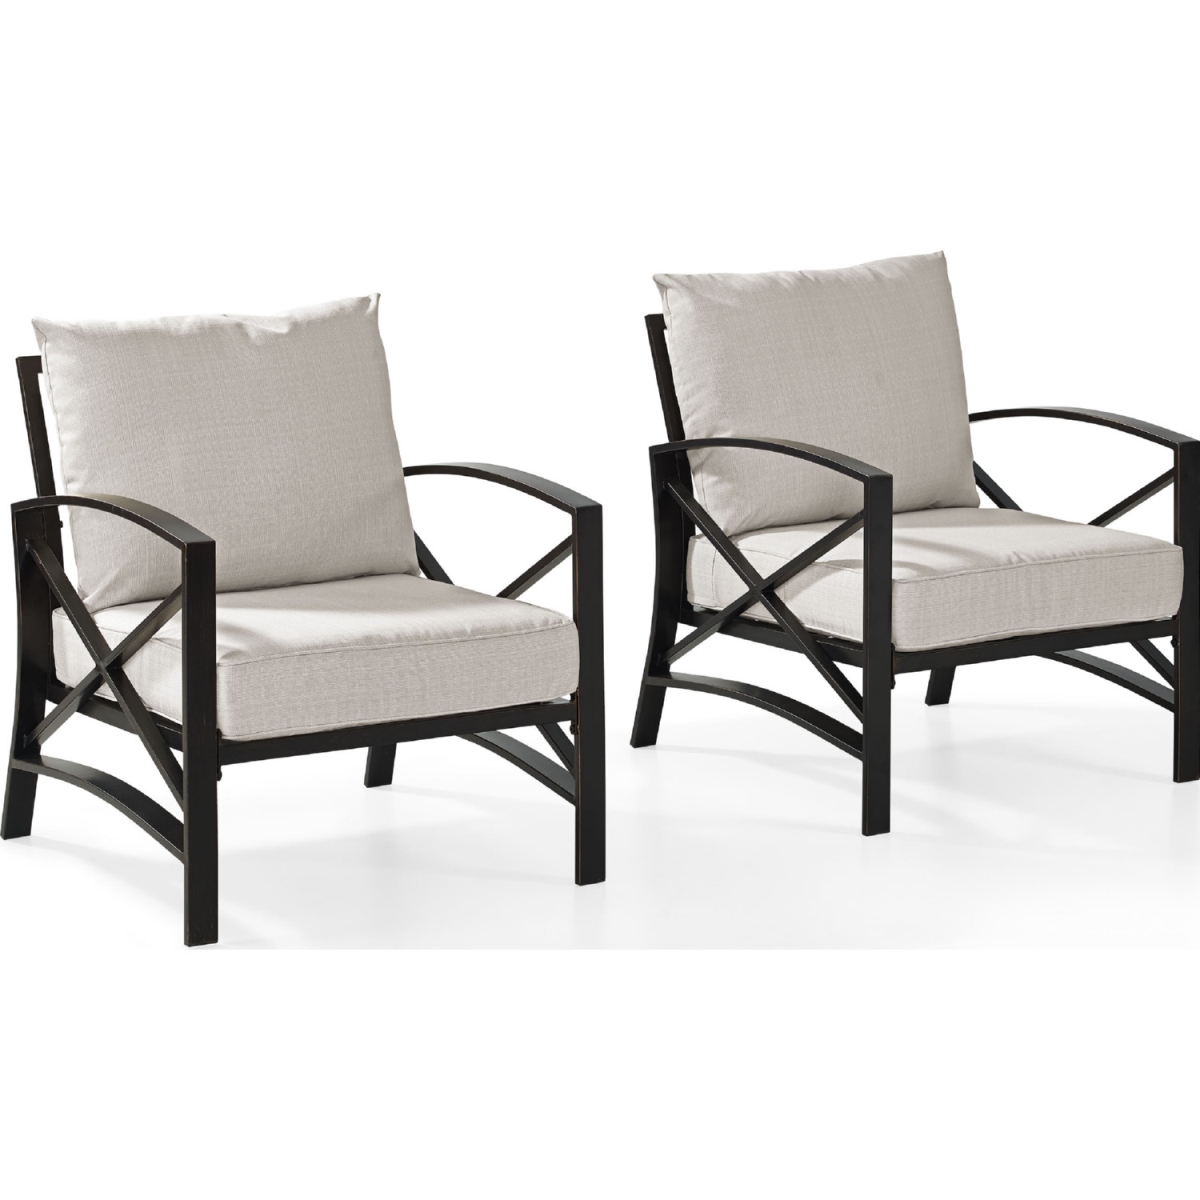 2 Piece Kaplan Outdoor Seating Set With Oatmeal Cushion - Two Kaplan Outdoor Chairs